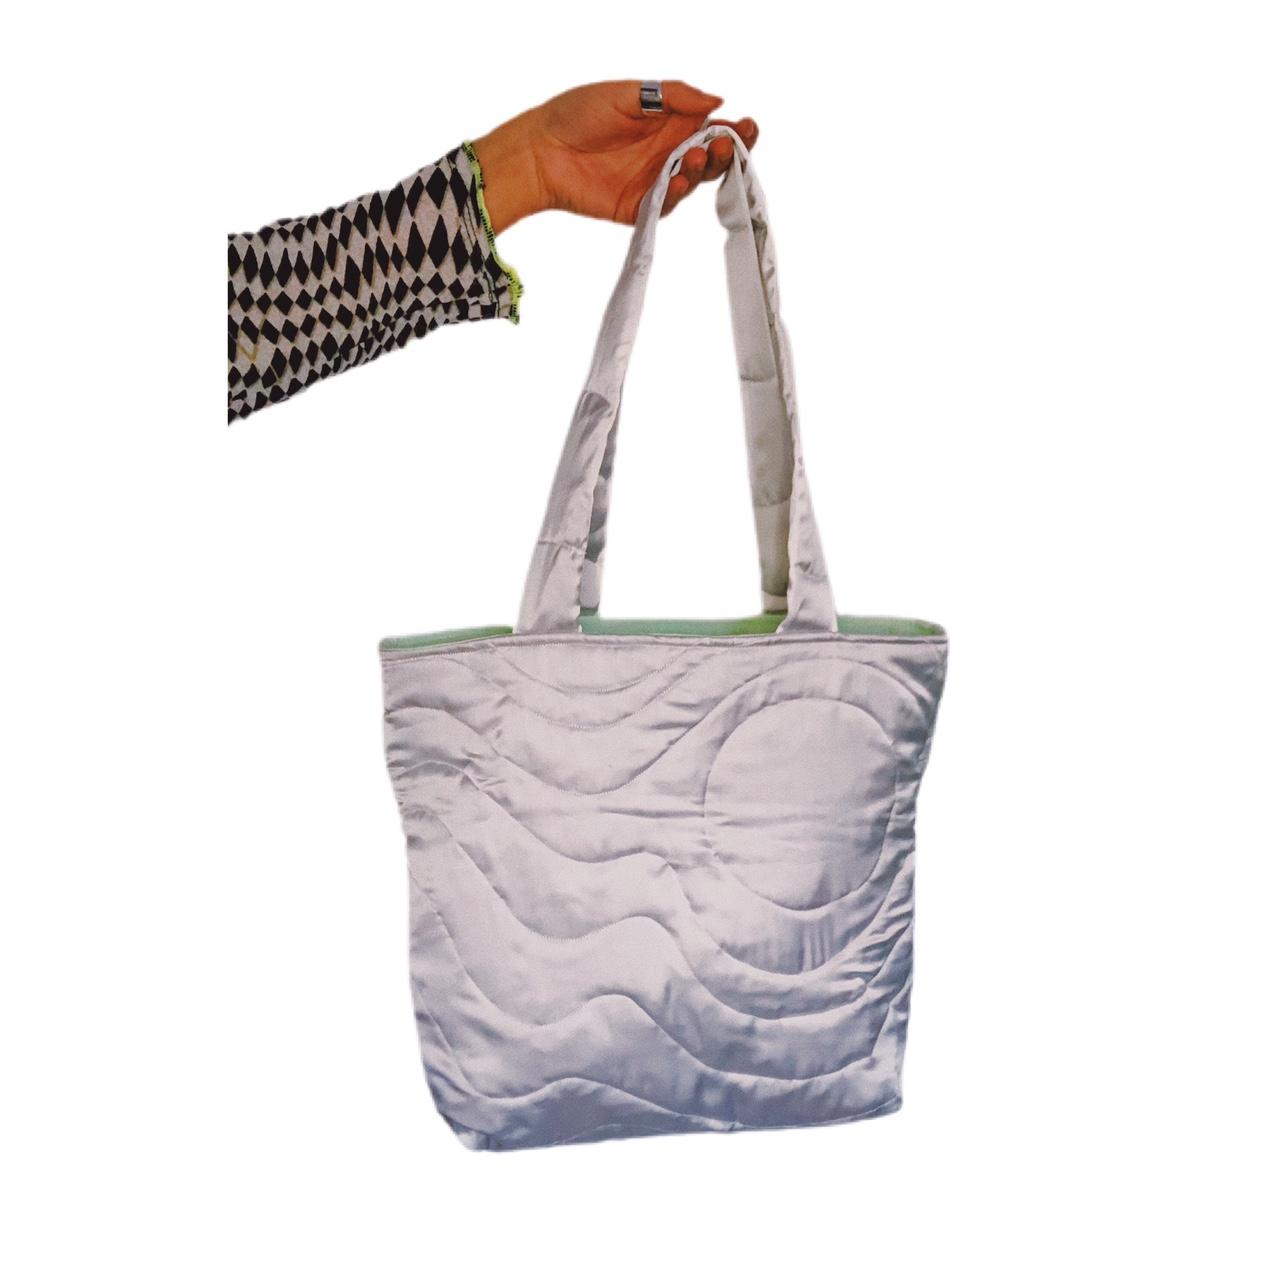 Women's Silver and Green Bag